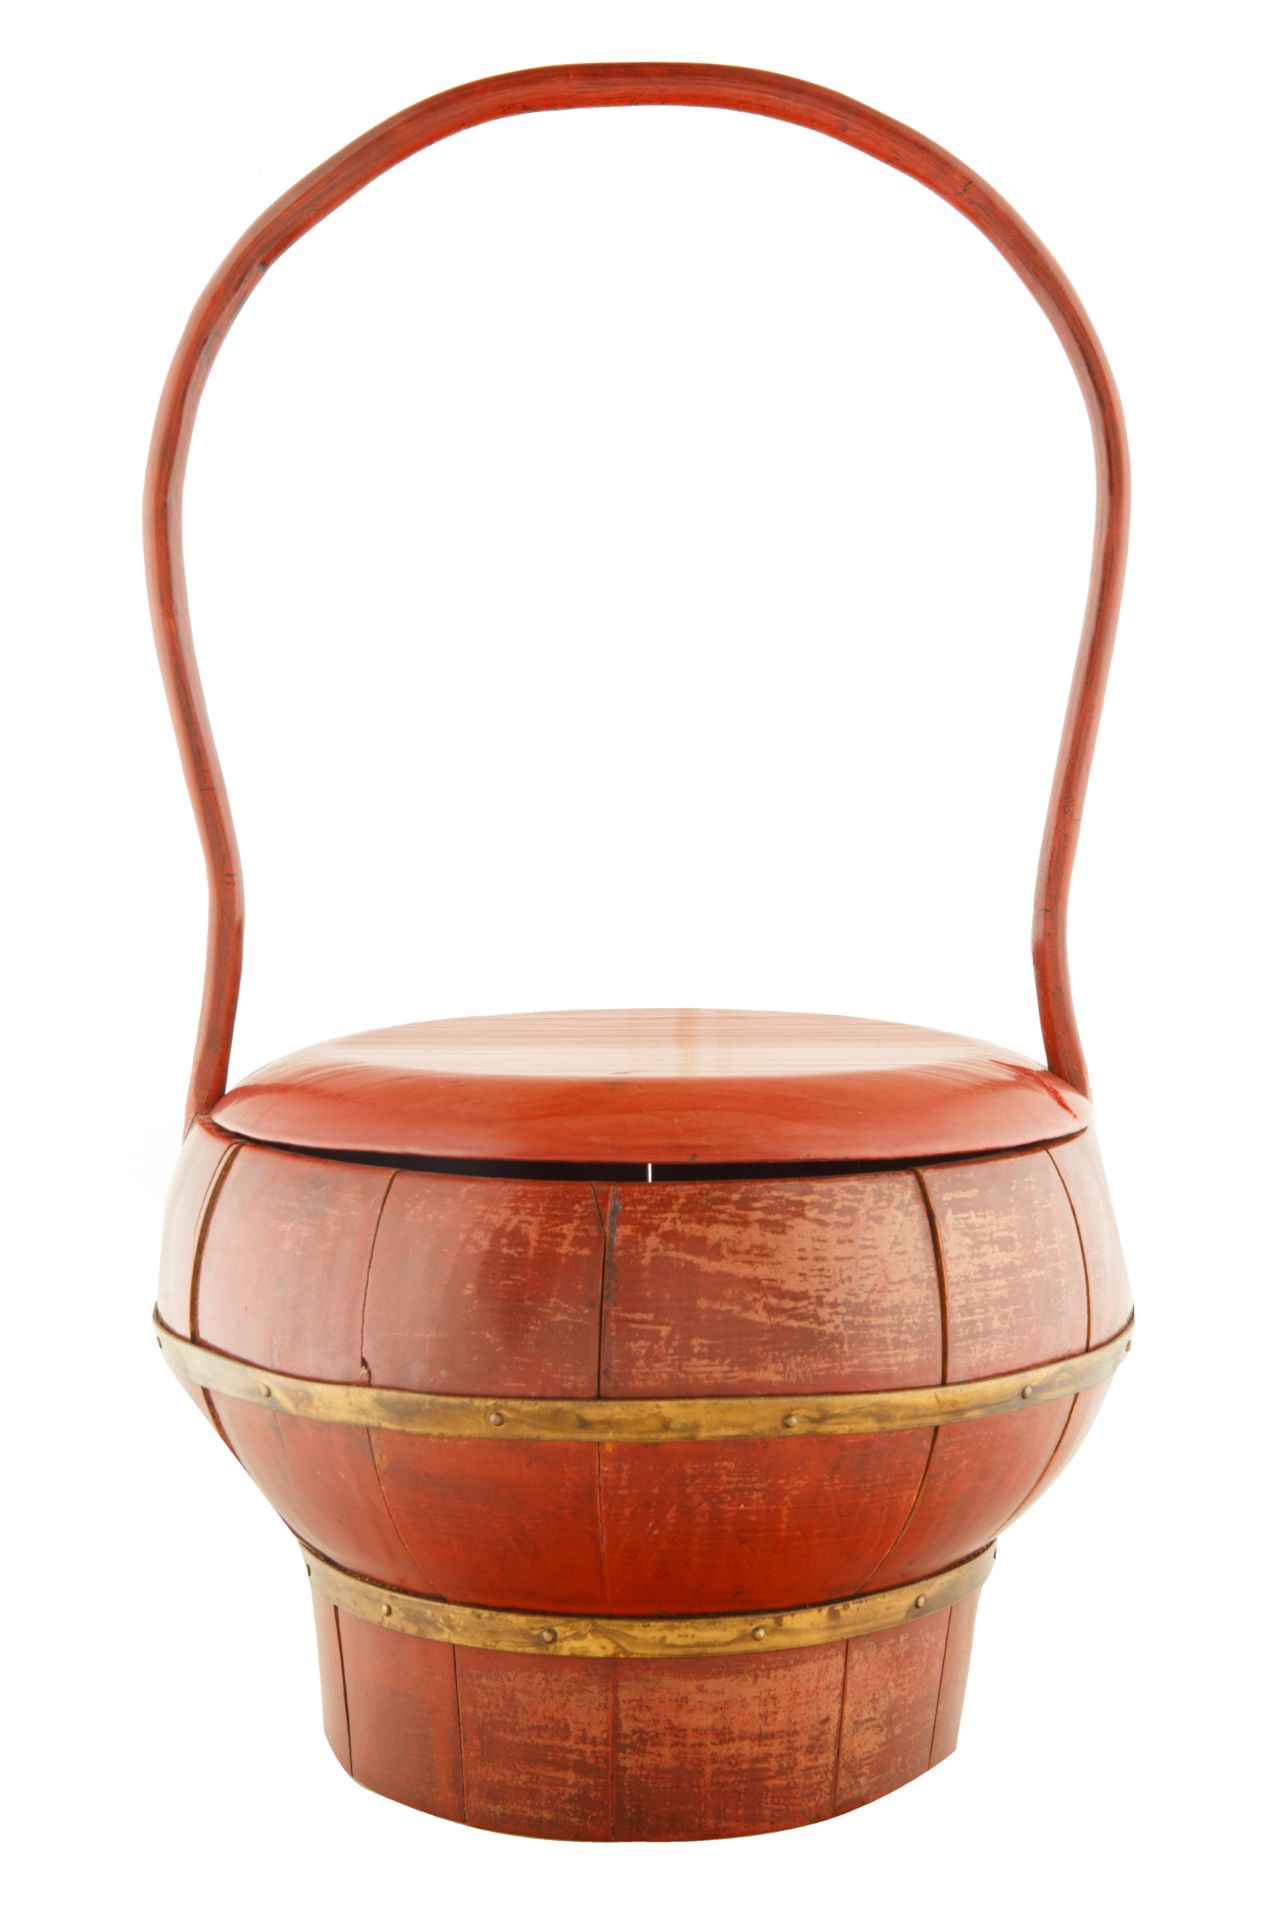 19TH CENTURY CHINESE RED LACQUERED WOOD BASKET - Image 2 of 4